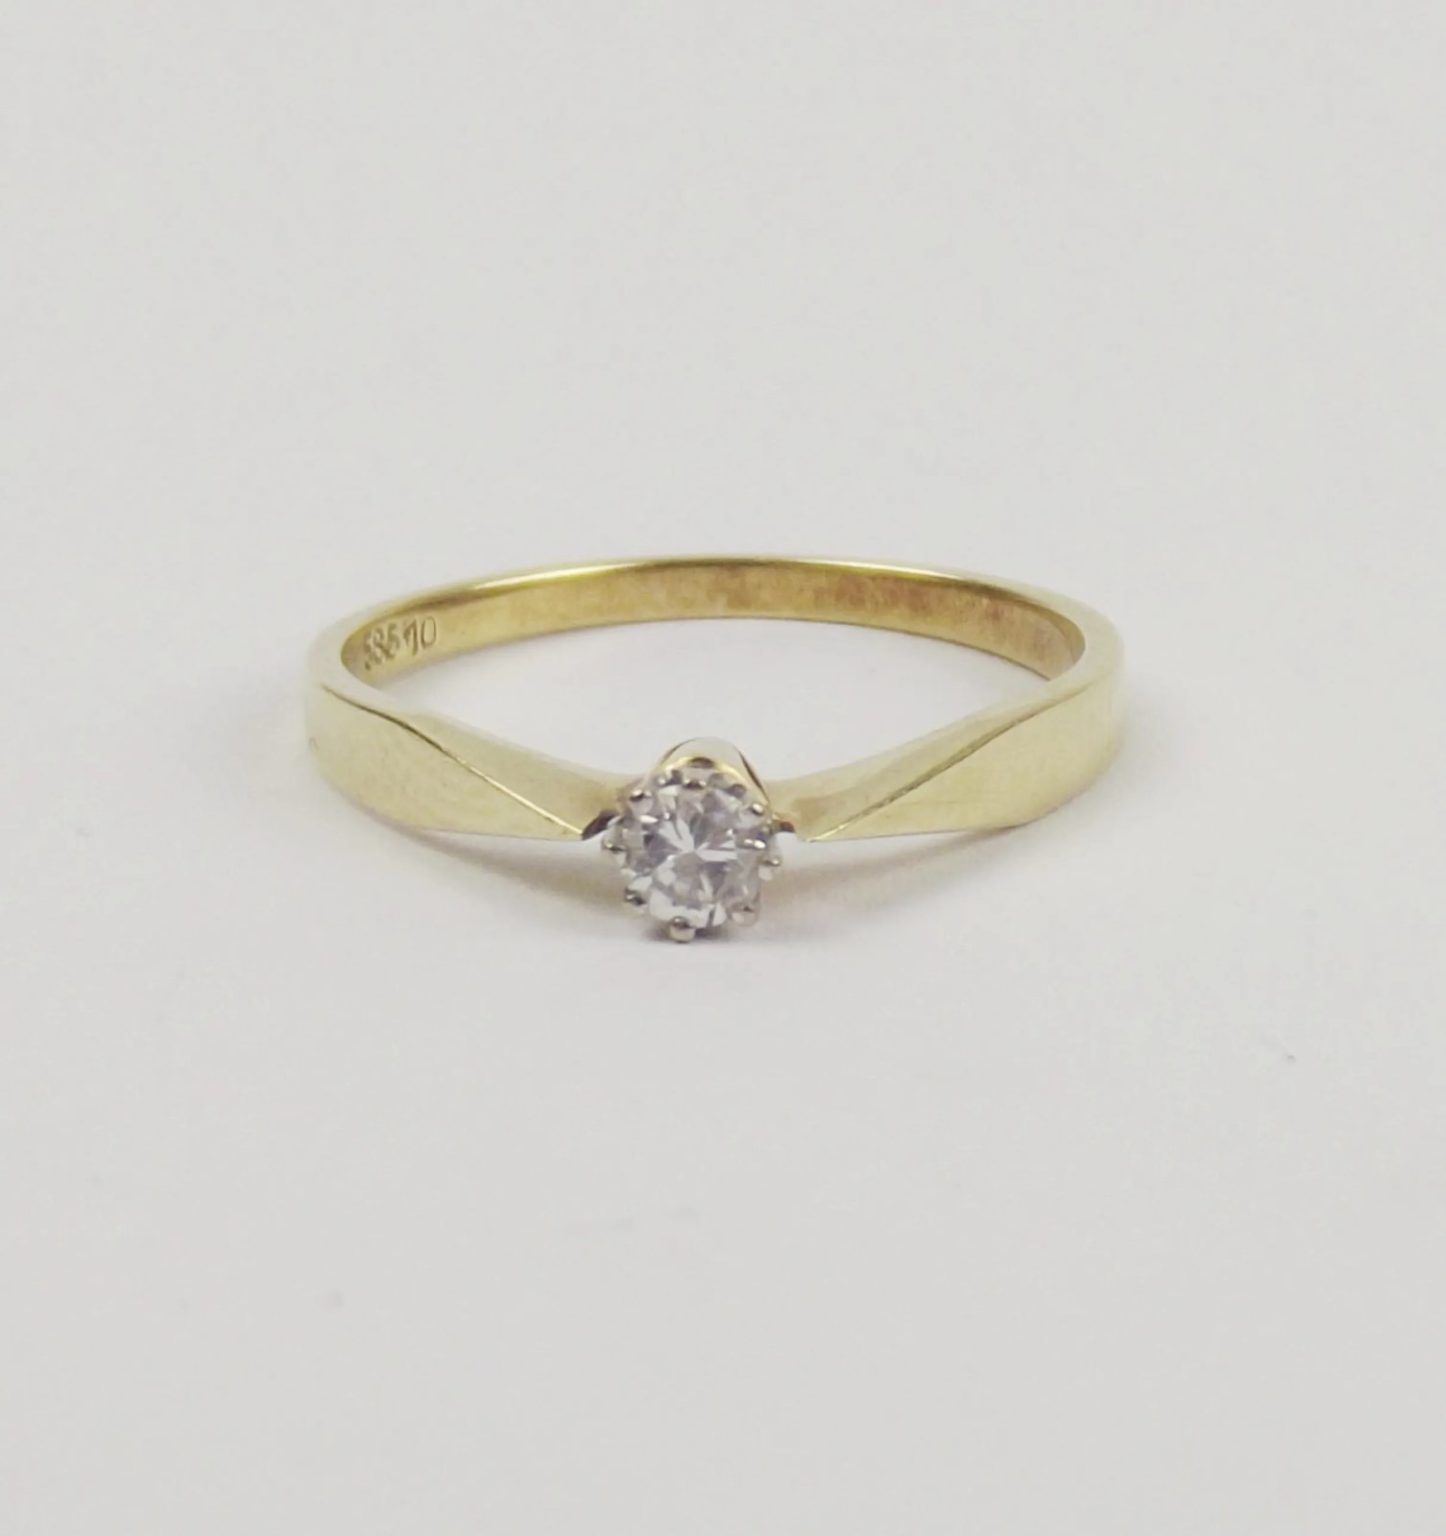 14ct Yellow Gold 0.1 Carat Diamond Solitaire Ring UK Size N US 6 ½ ...